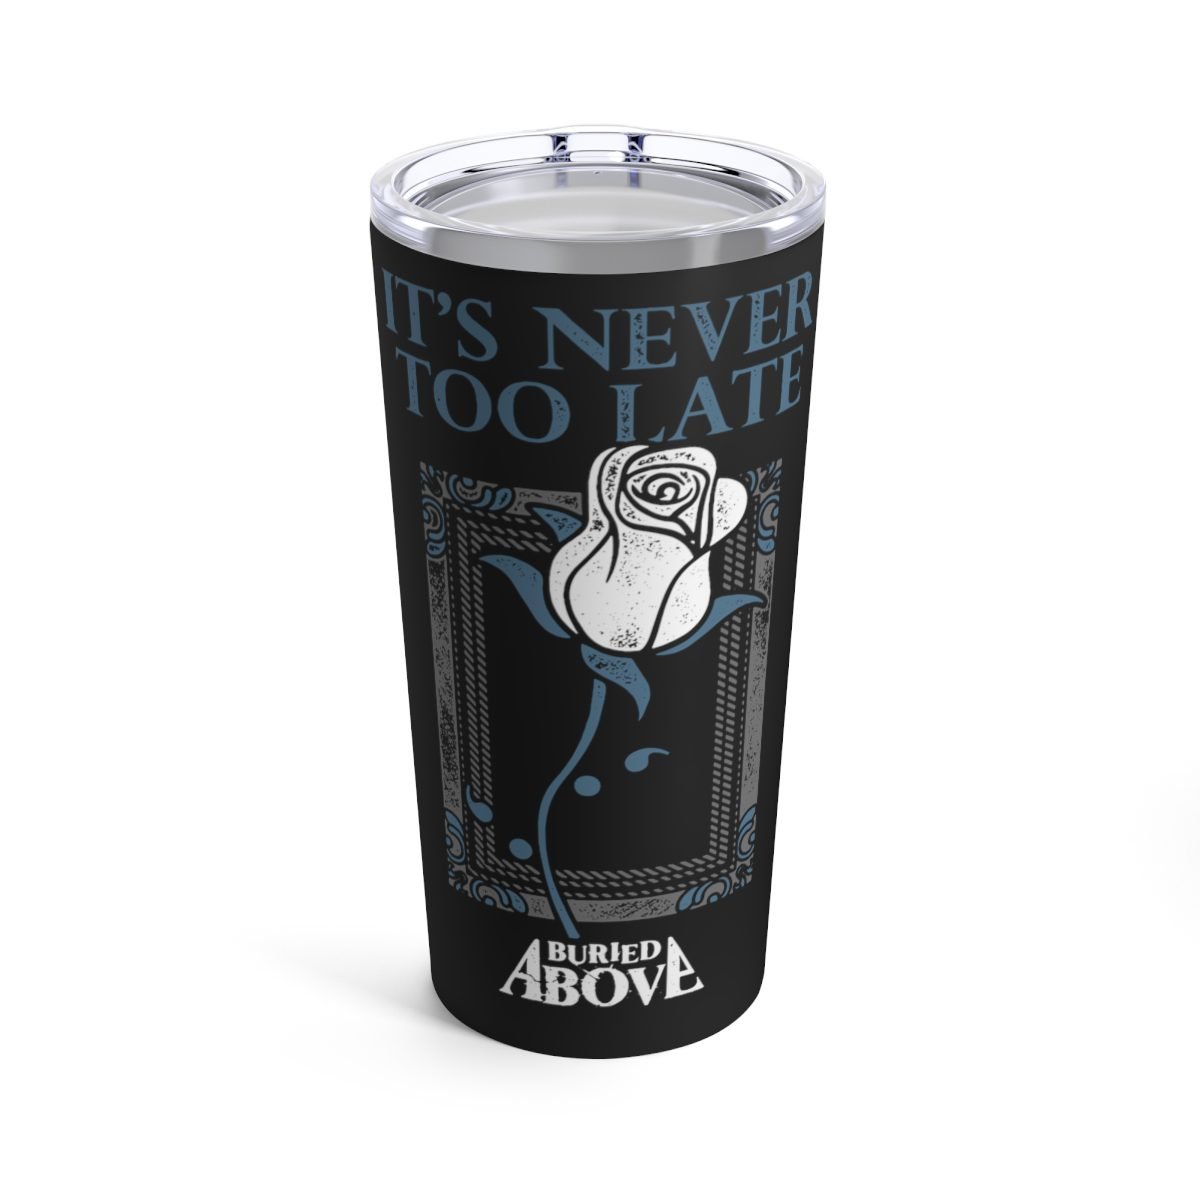 Buried Above – It’s Never Too Late 20oz Stainless Steel Tumbler